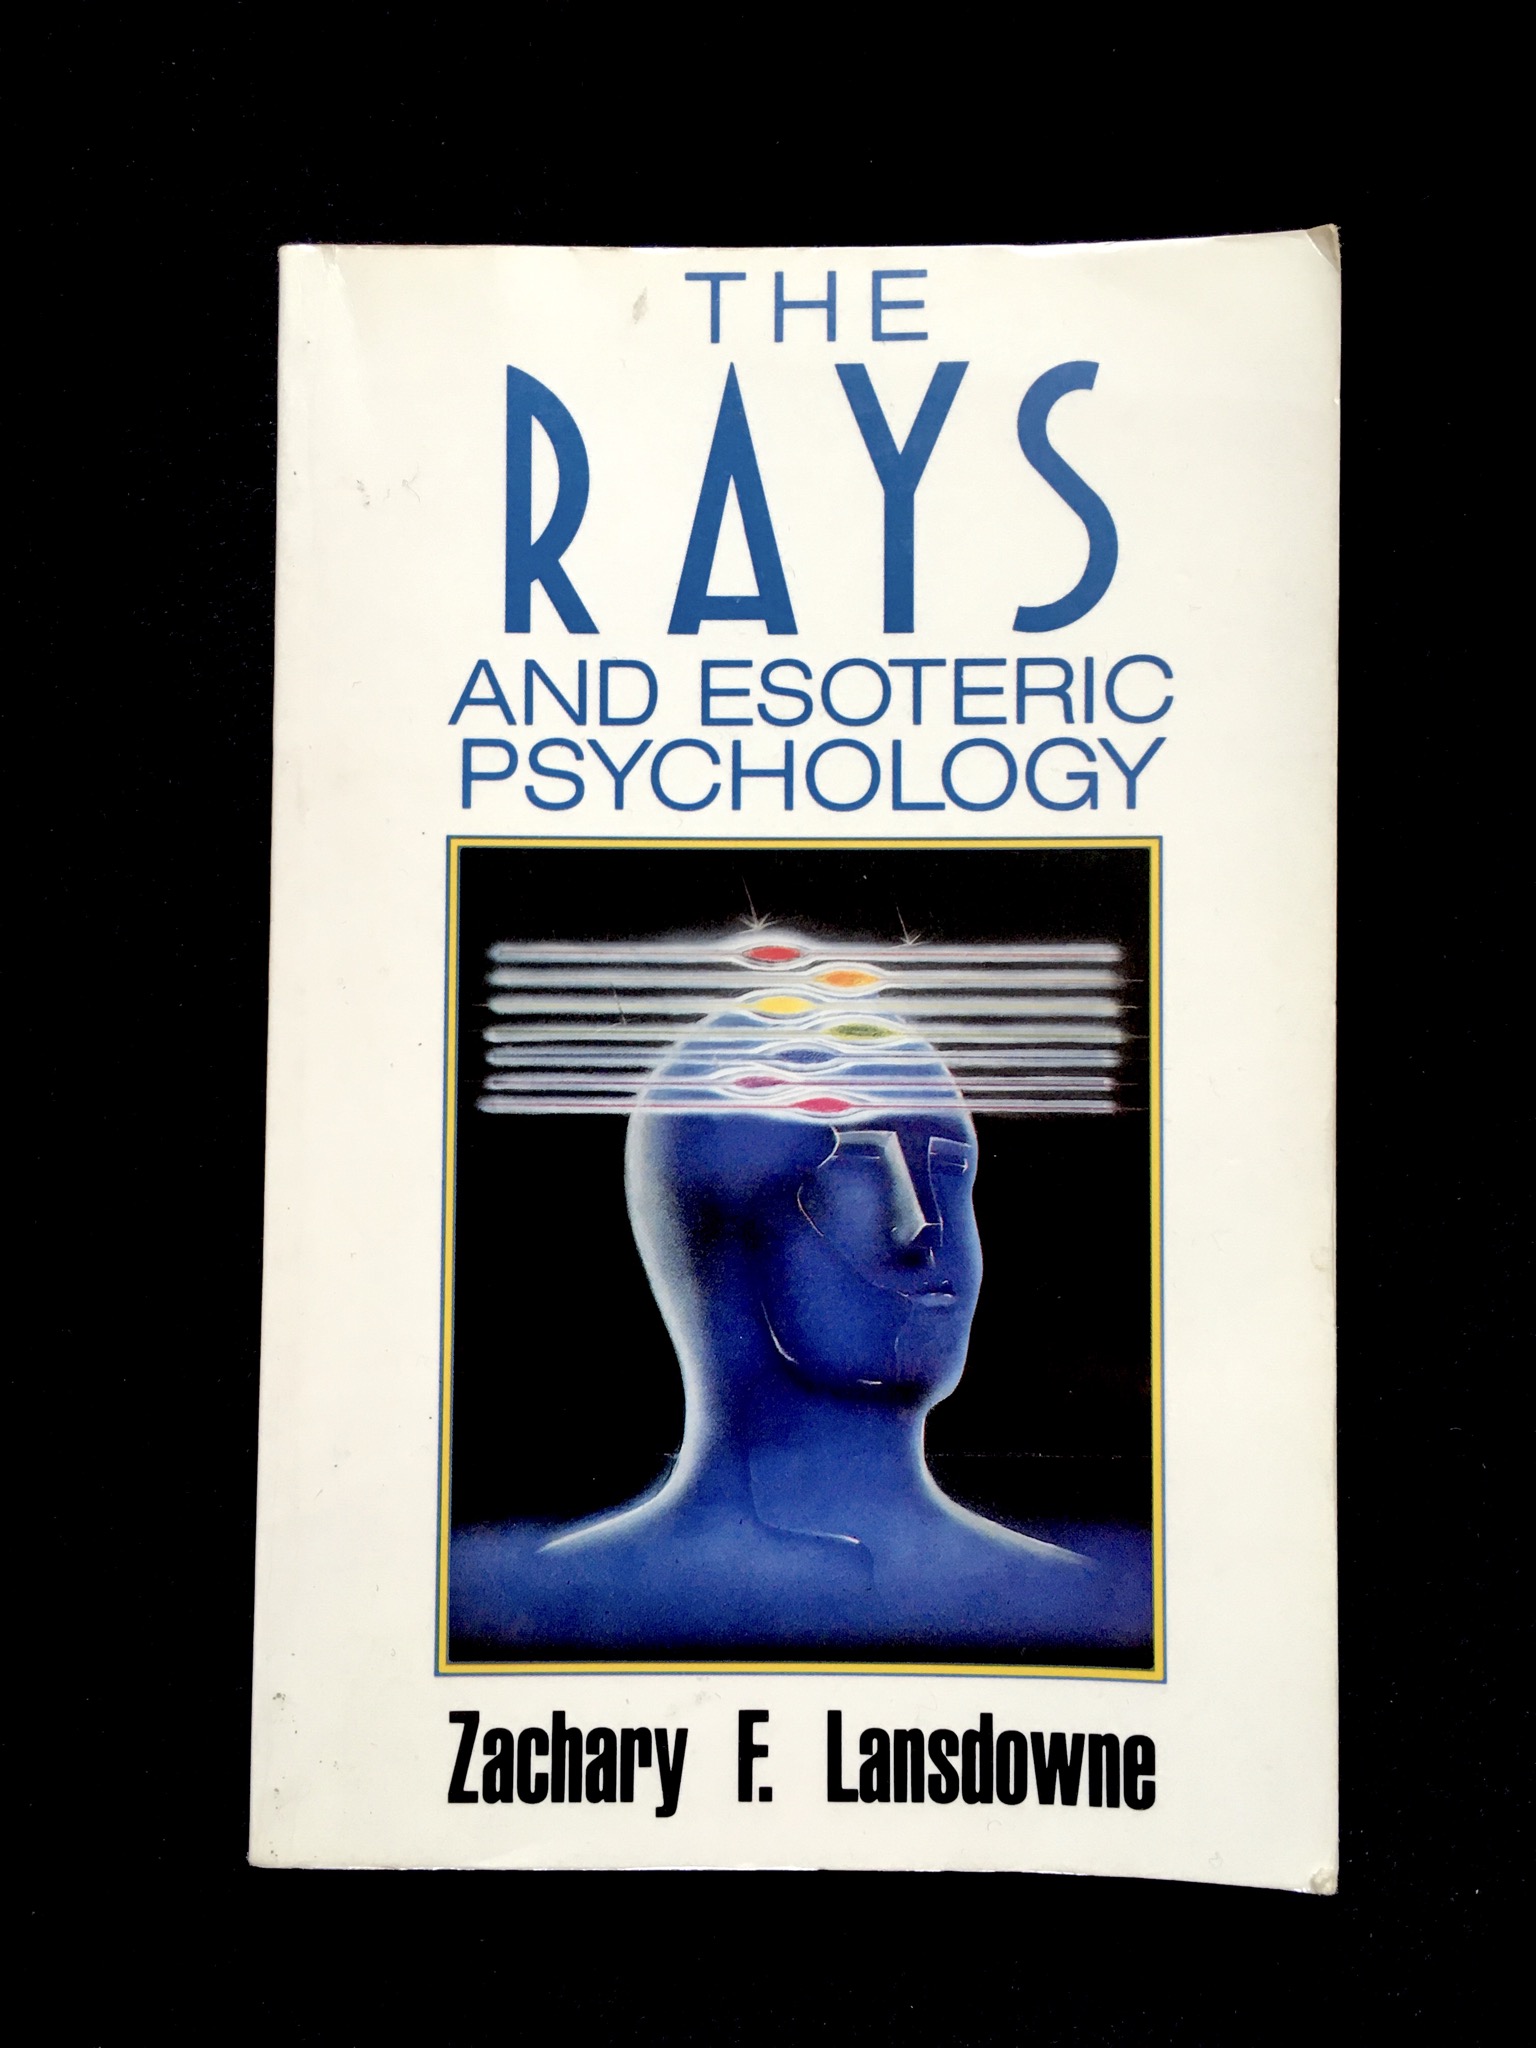 The Rays and Esoteric Psychology by Zachary F. Lansdowne